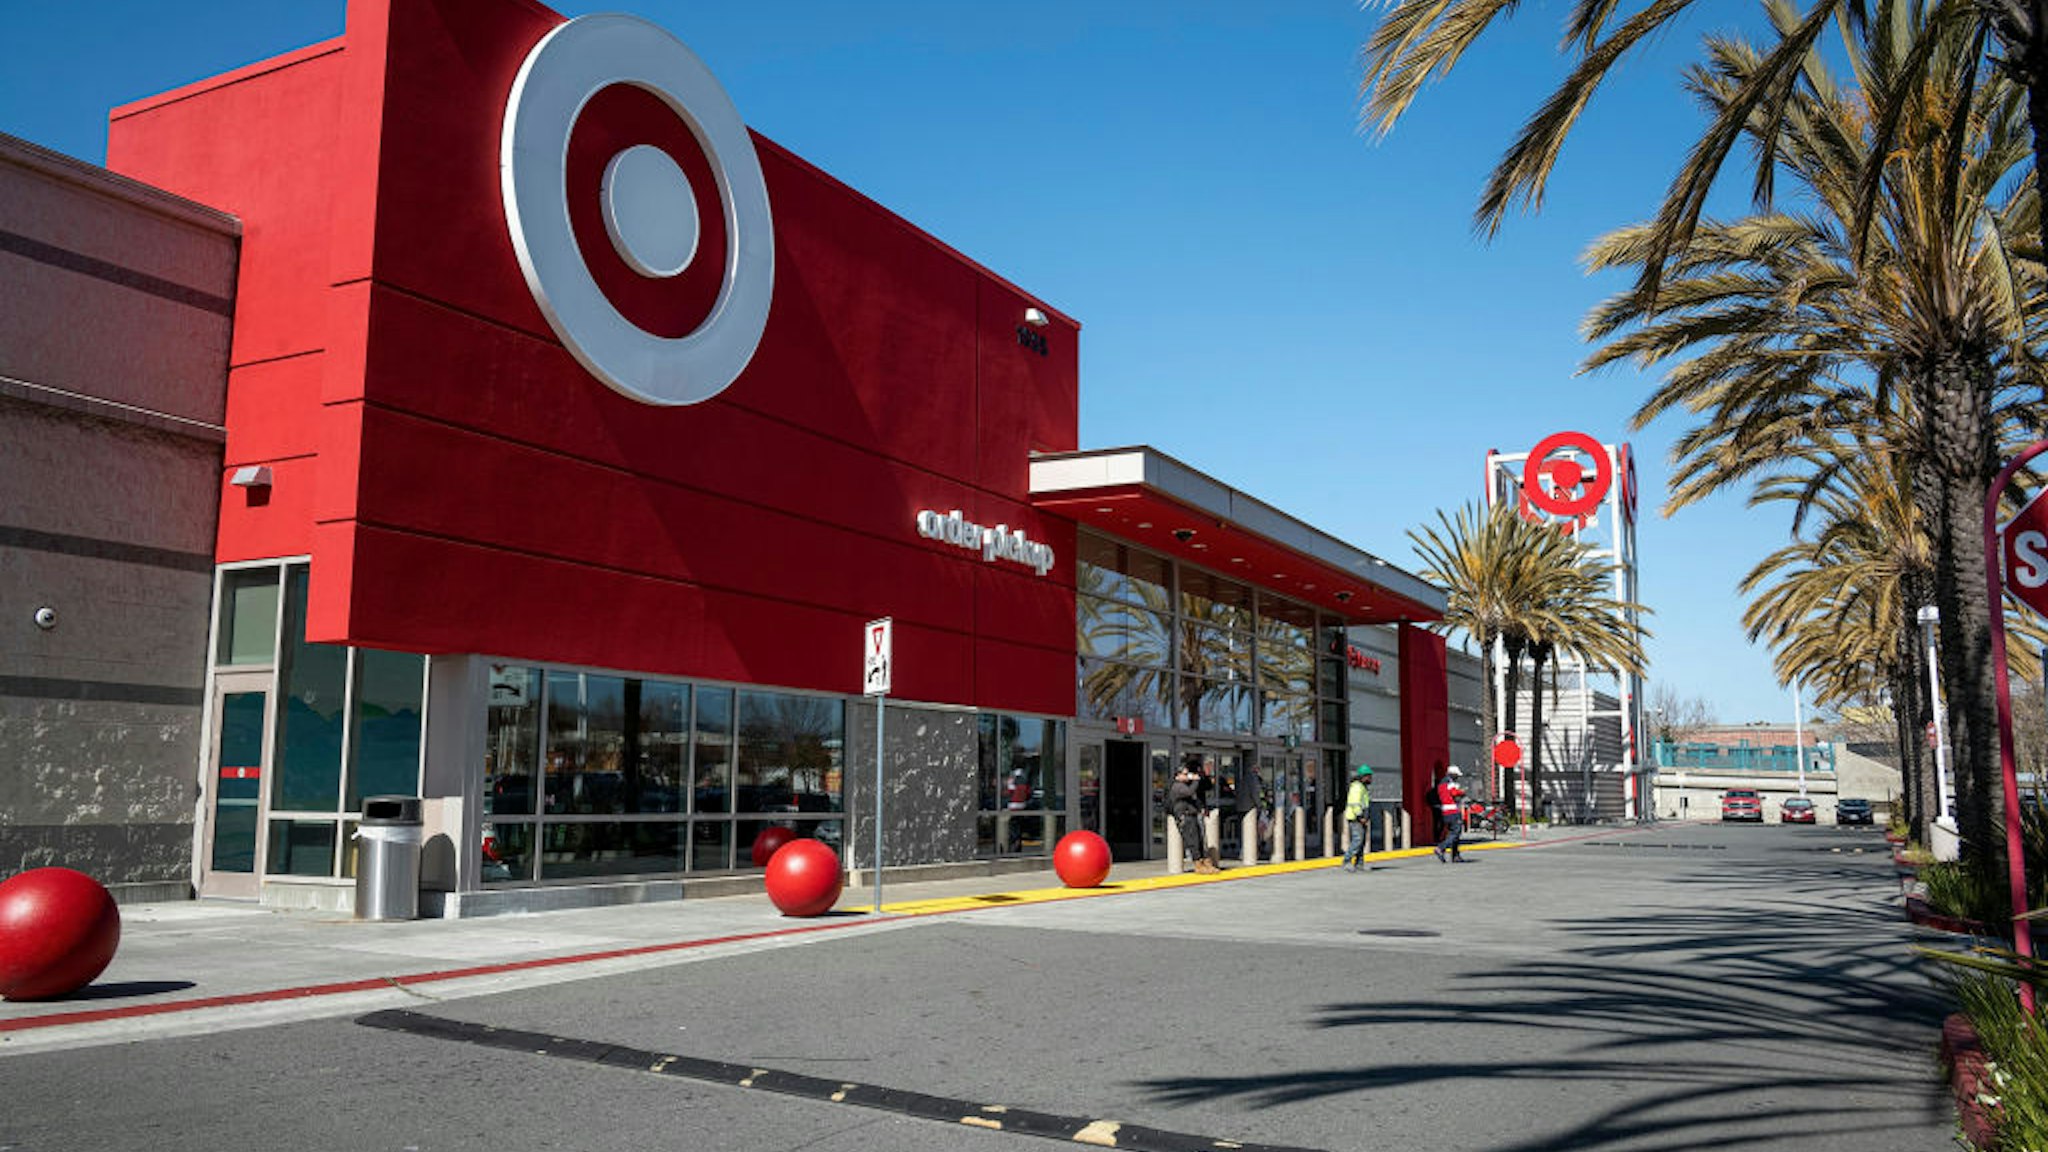 A Target Corp. store in Emeryville, California, U.S., on Monday, March 1, 2021.